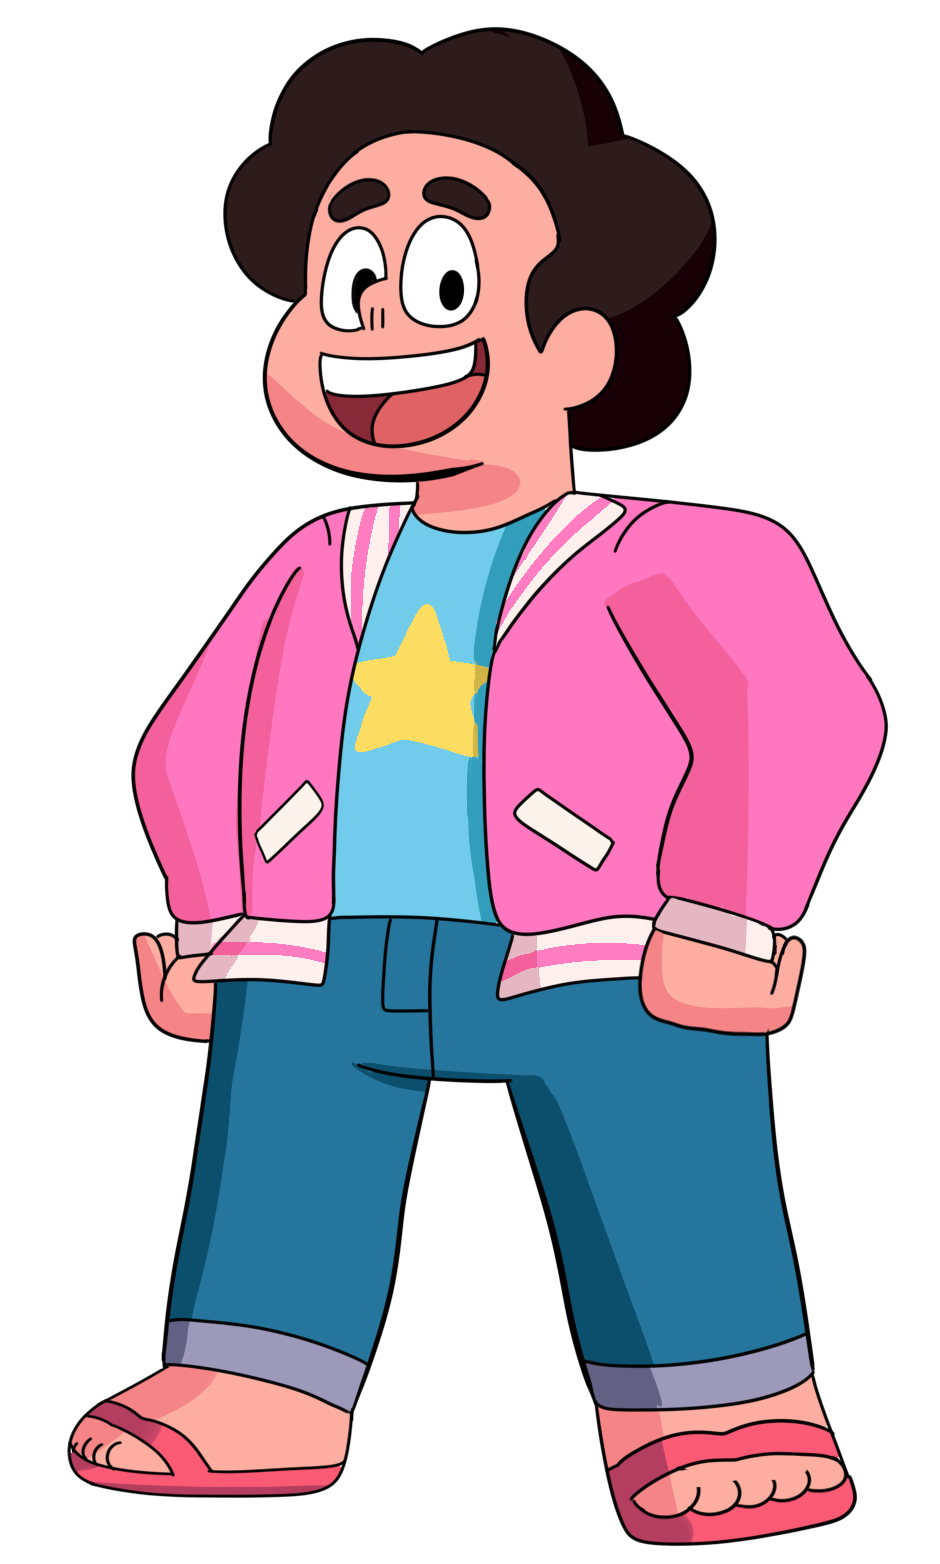 IT'S SO WERID DRAWING HIM WTIH A NECK BUT HERE'S OUR BIG BOI STEVEN
Sorry I'm late to the hype sksksks